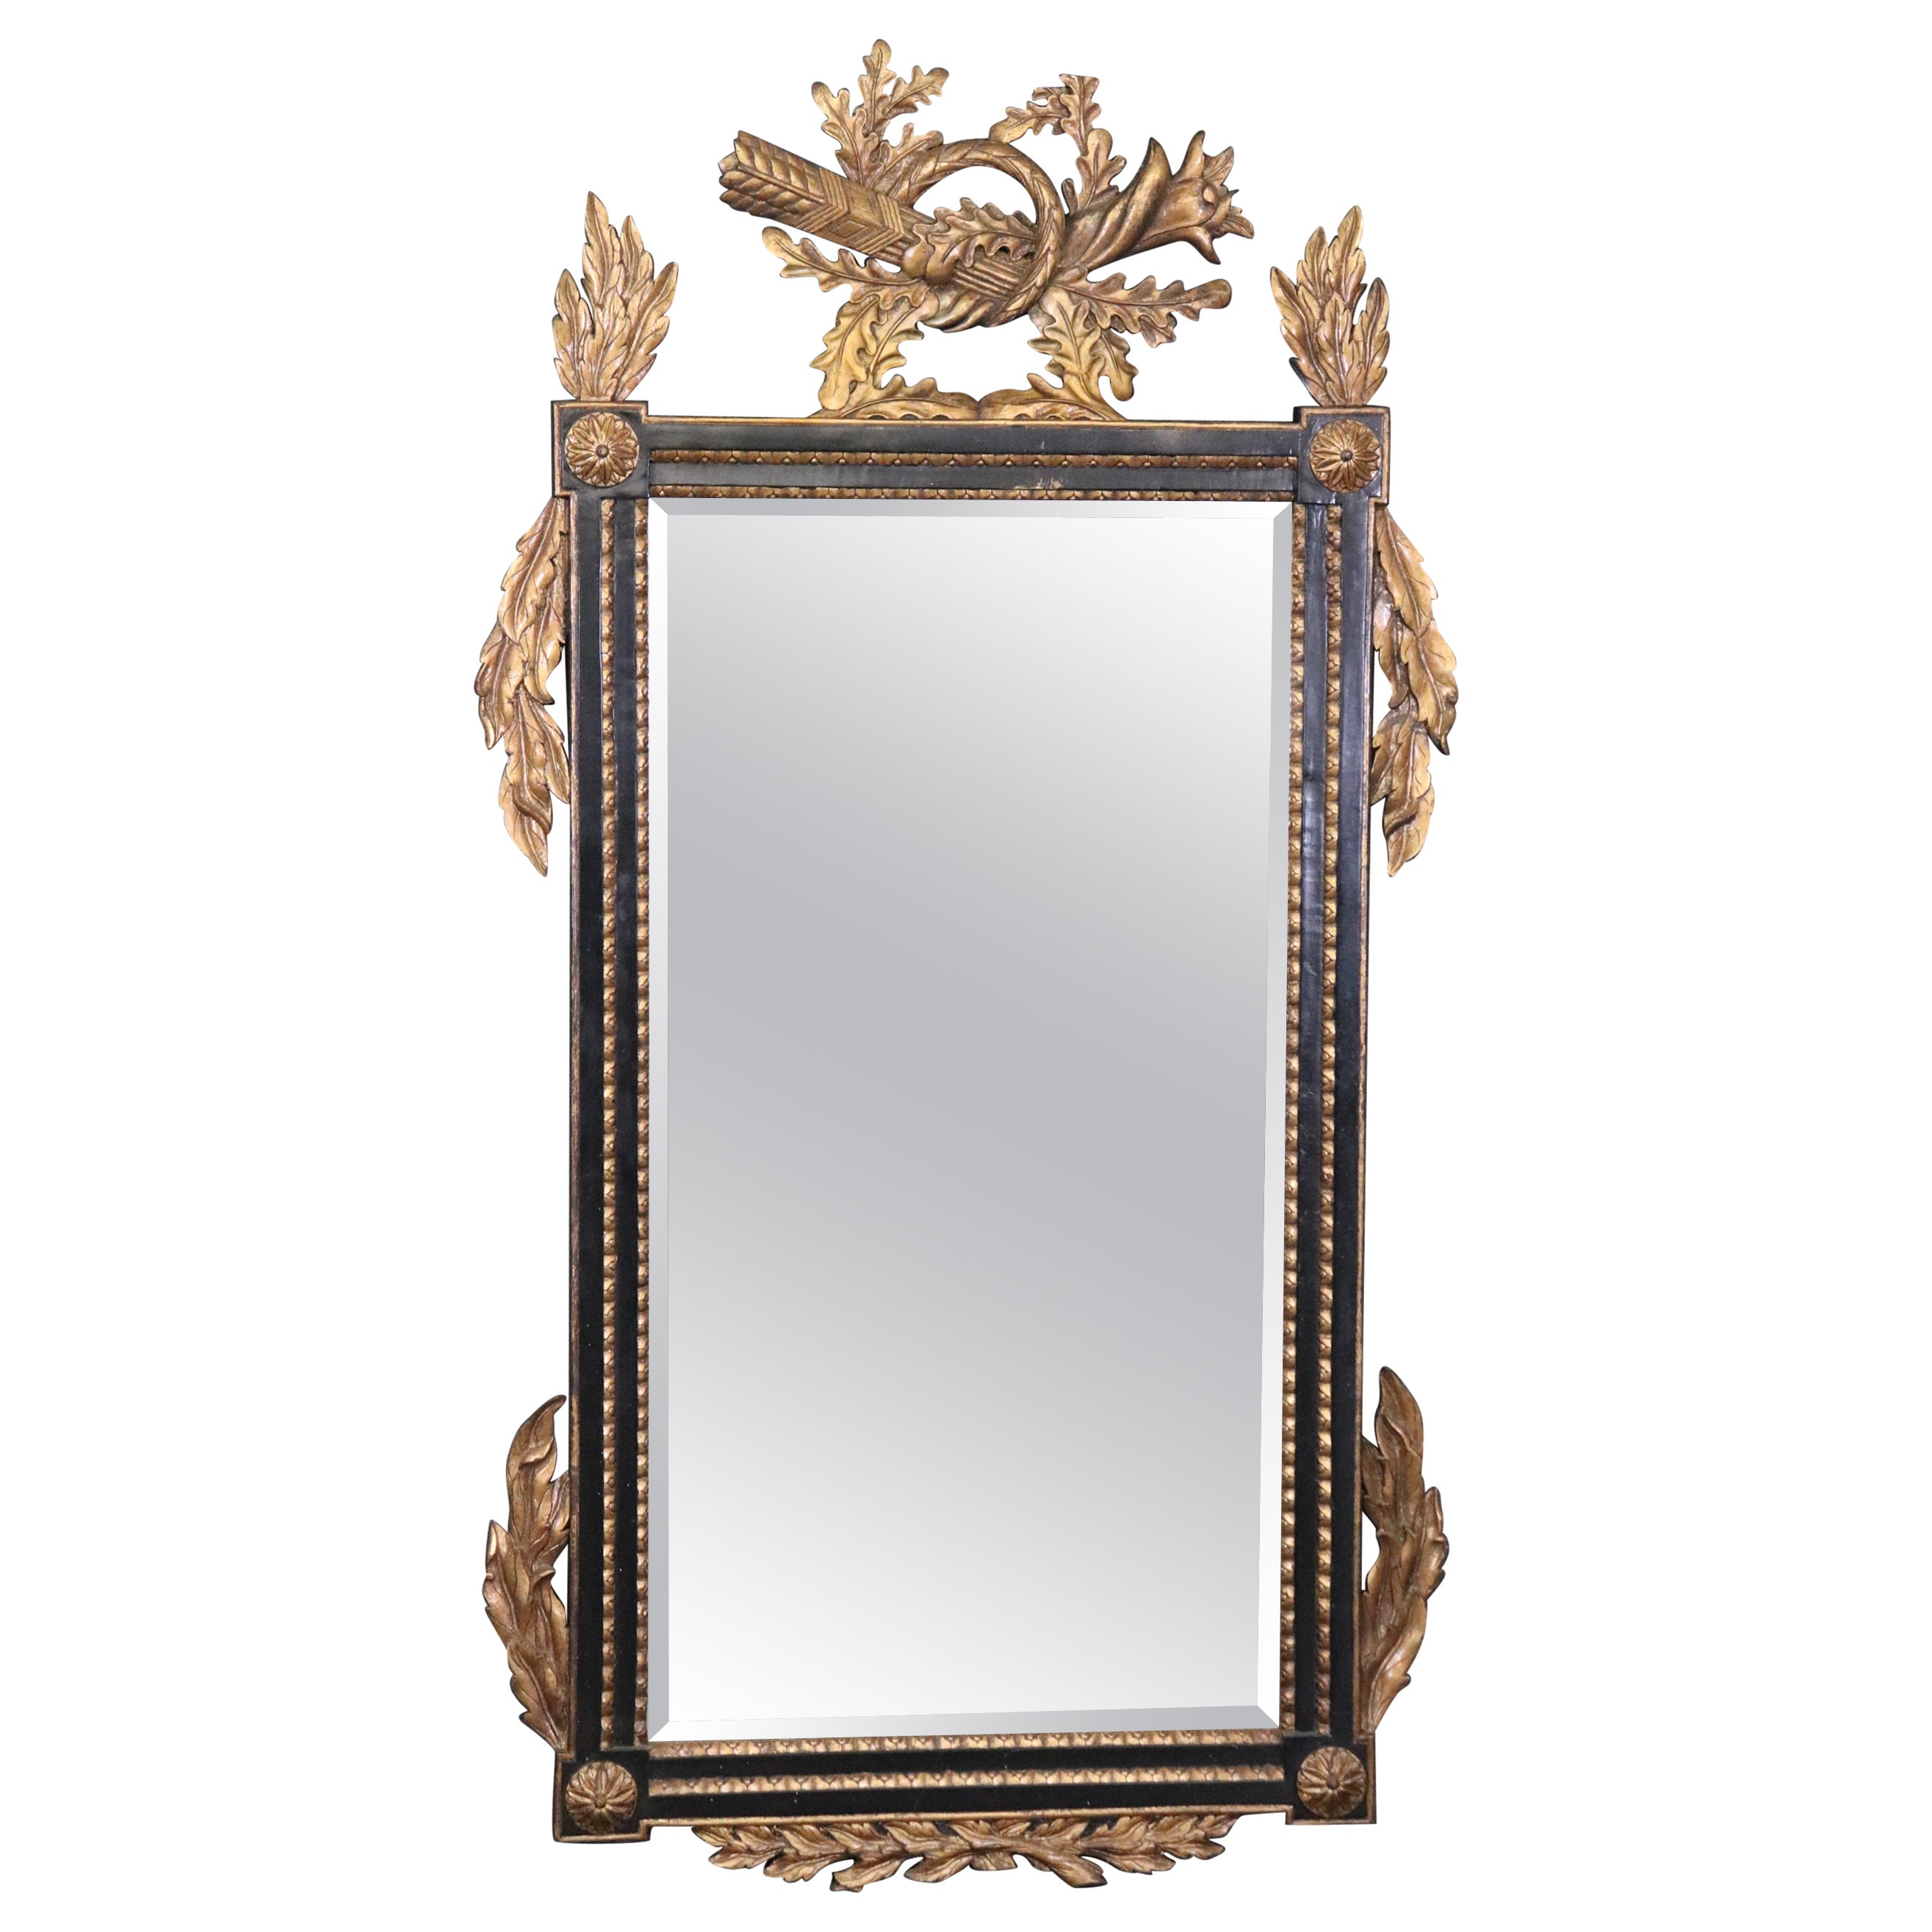 Regency Style Ebonized and Gilt Carved Floral Wall Hanging Mirror For Sale